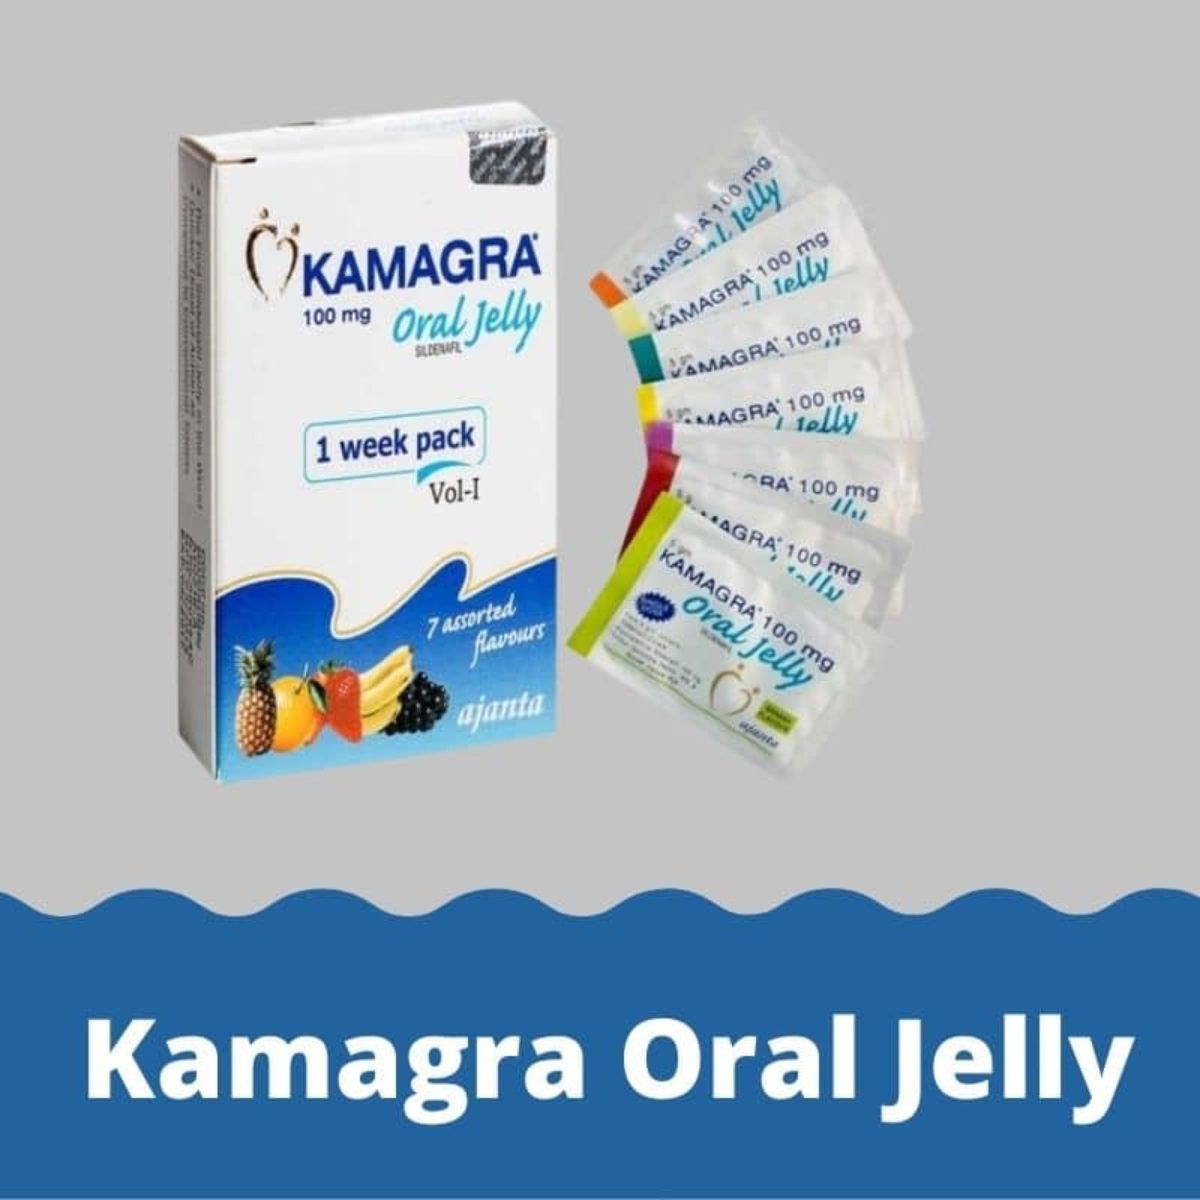 Kamagra Oral Jelly 100 mg for ED - Uses, Dosage, Price